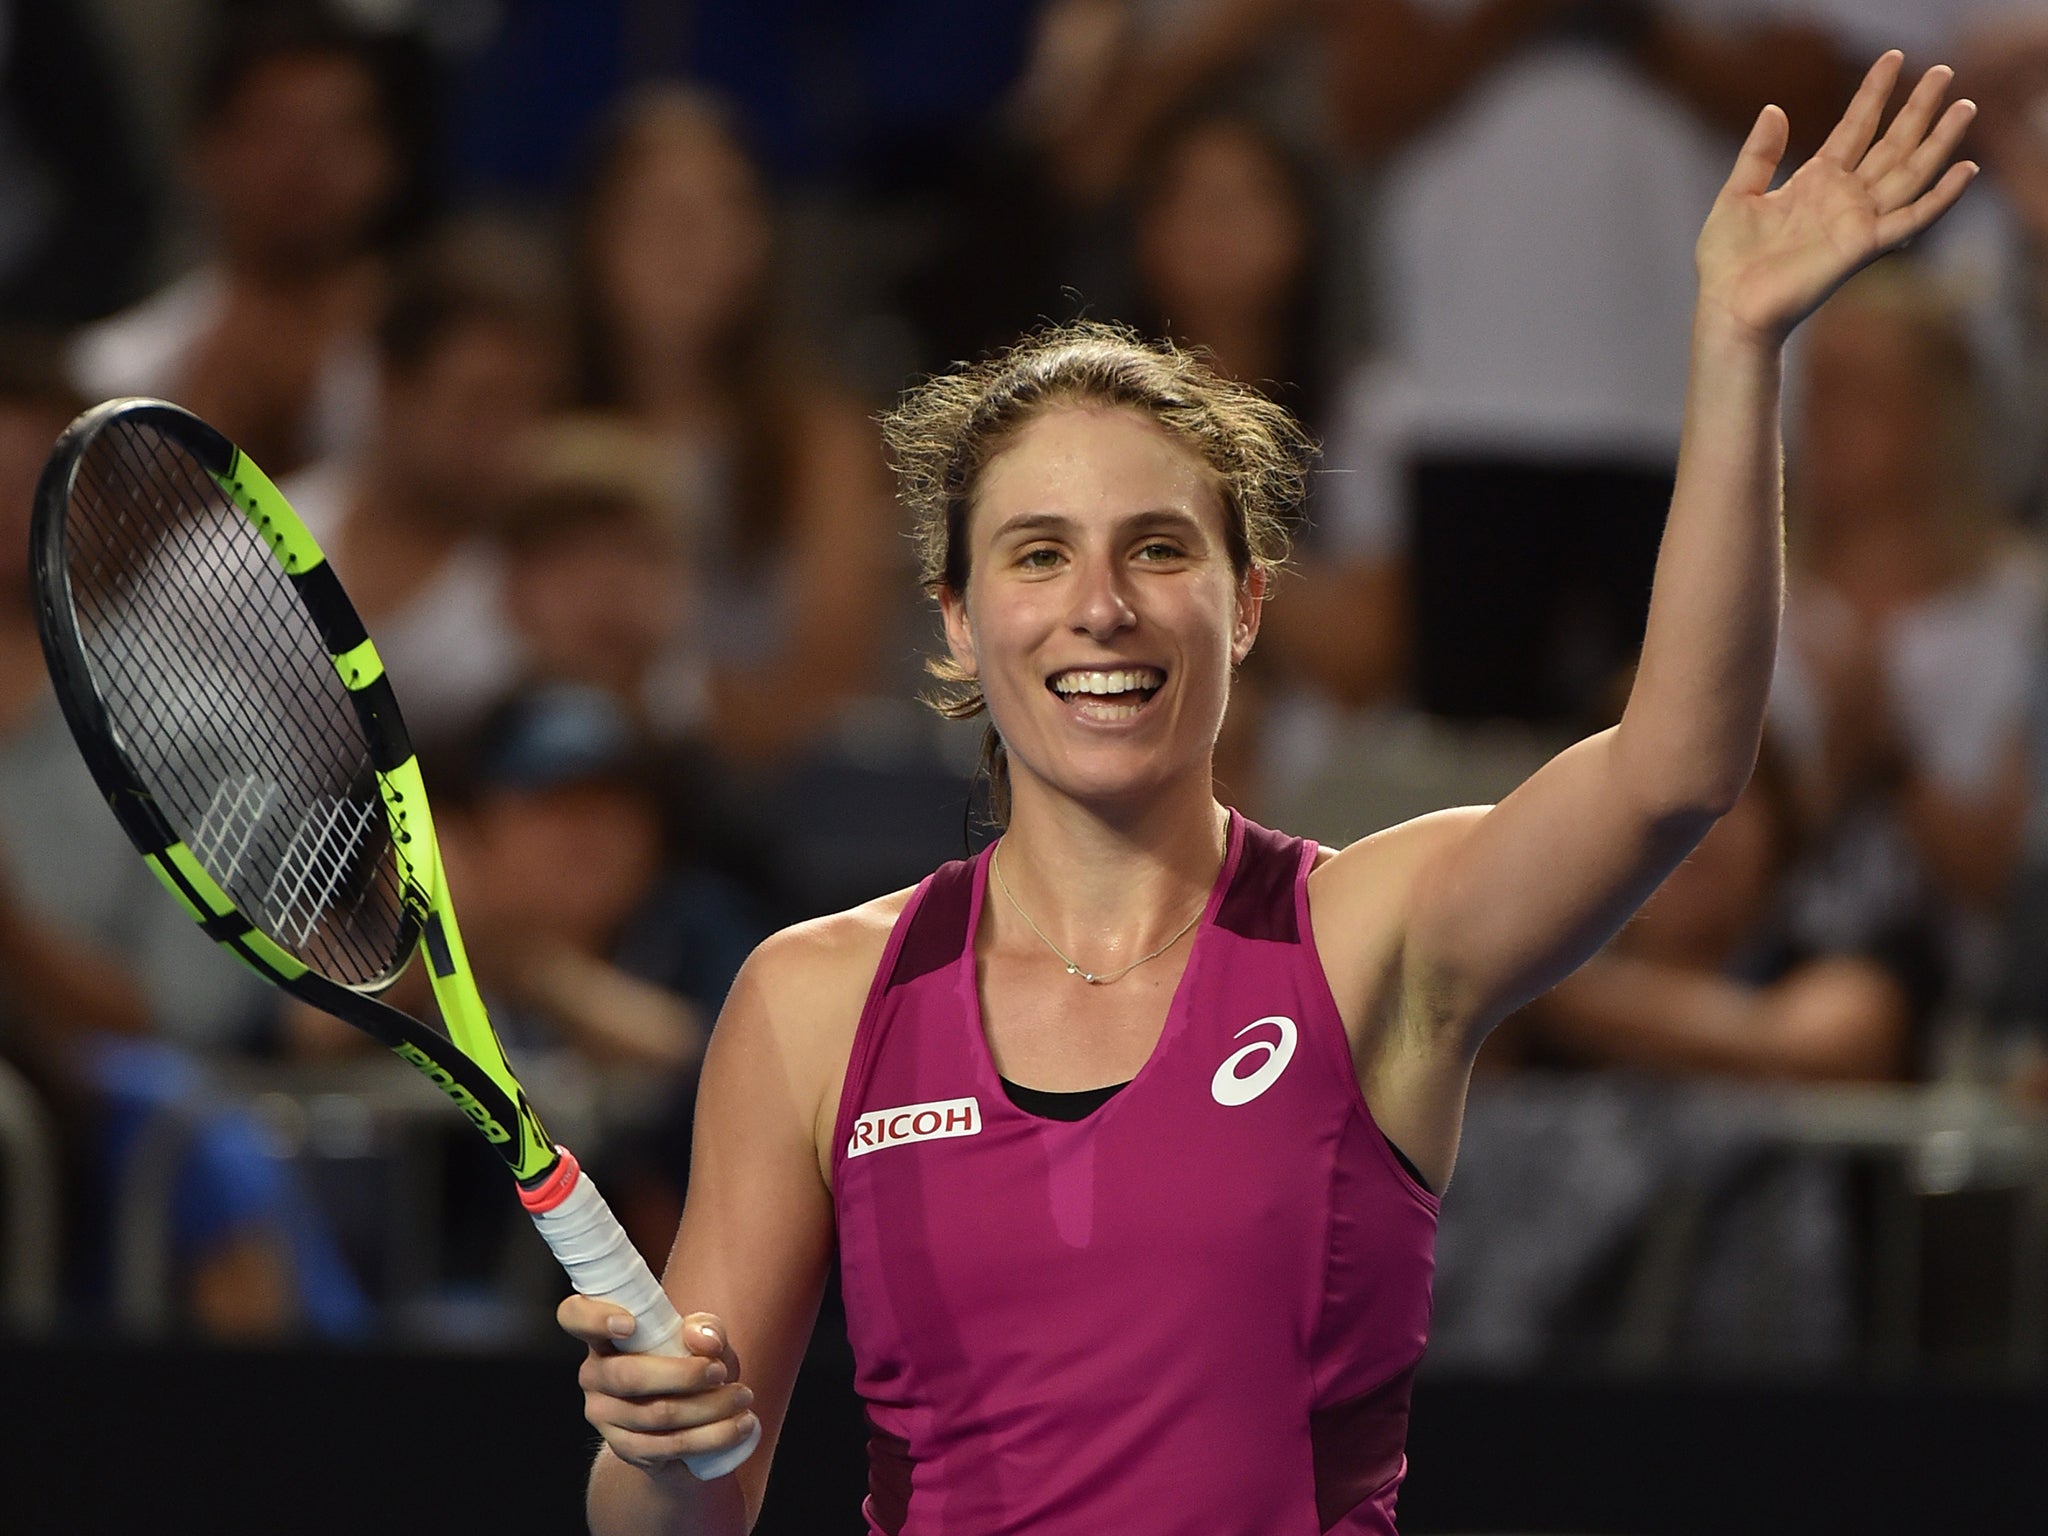 Johanna Konta will be looking to reach her first ever Grand Slam final